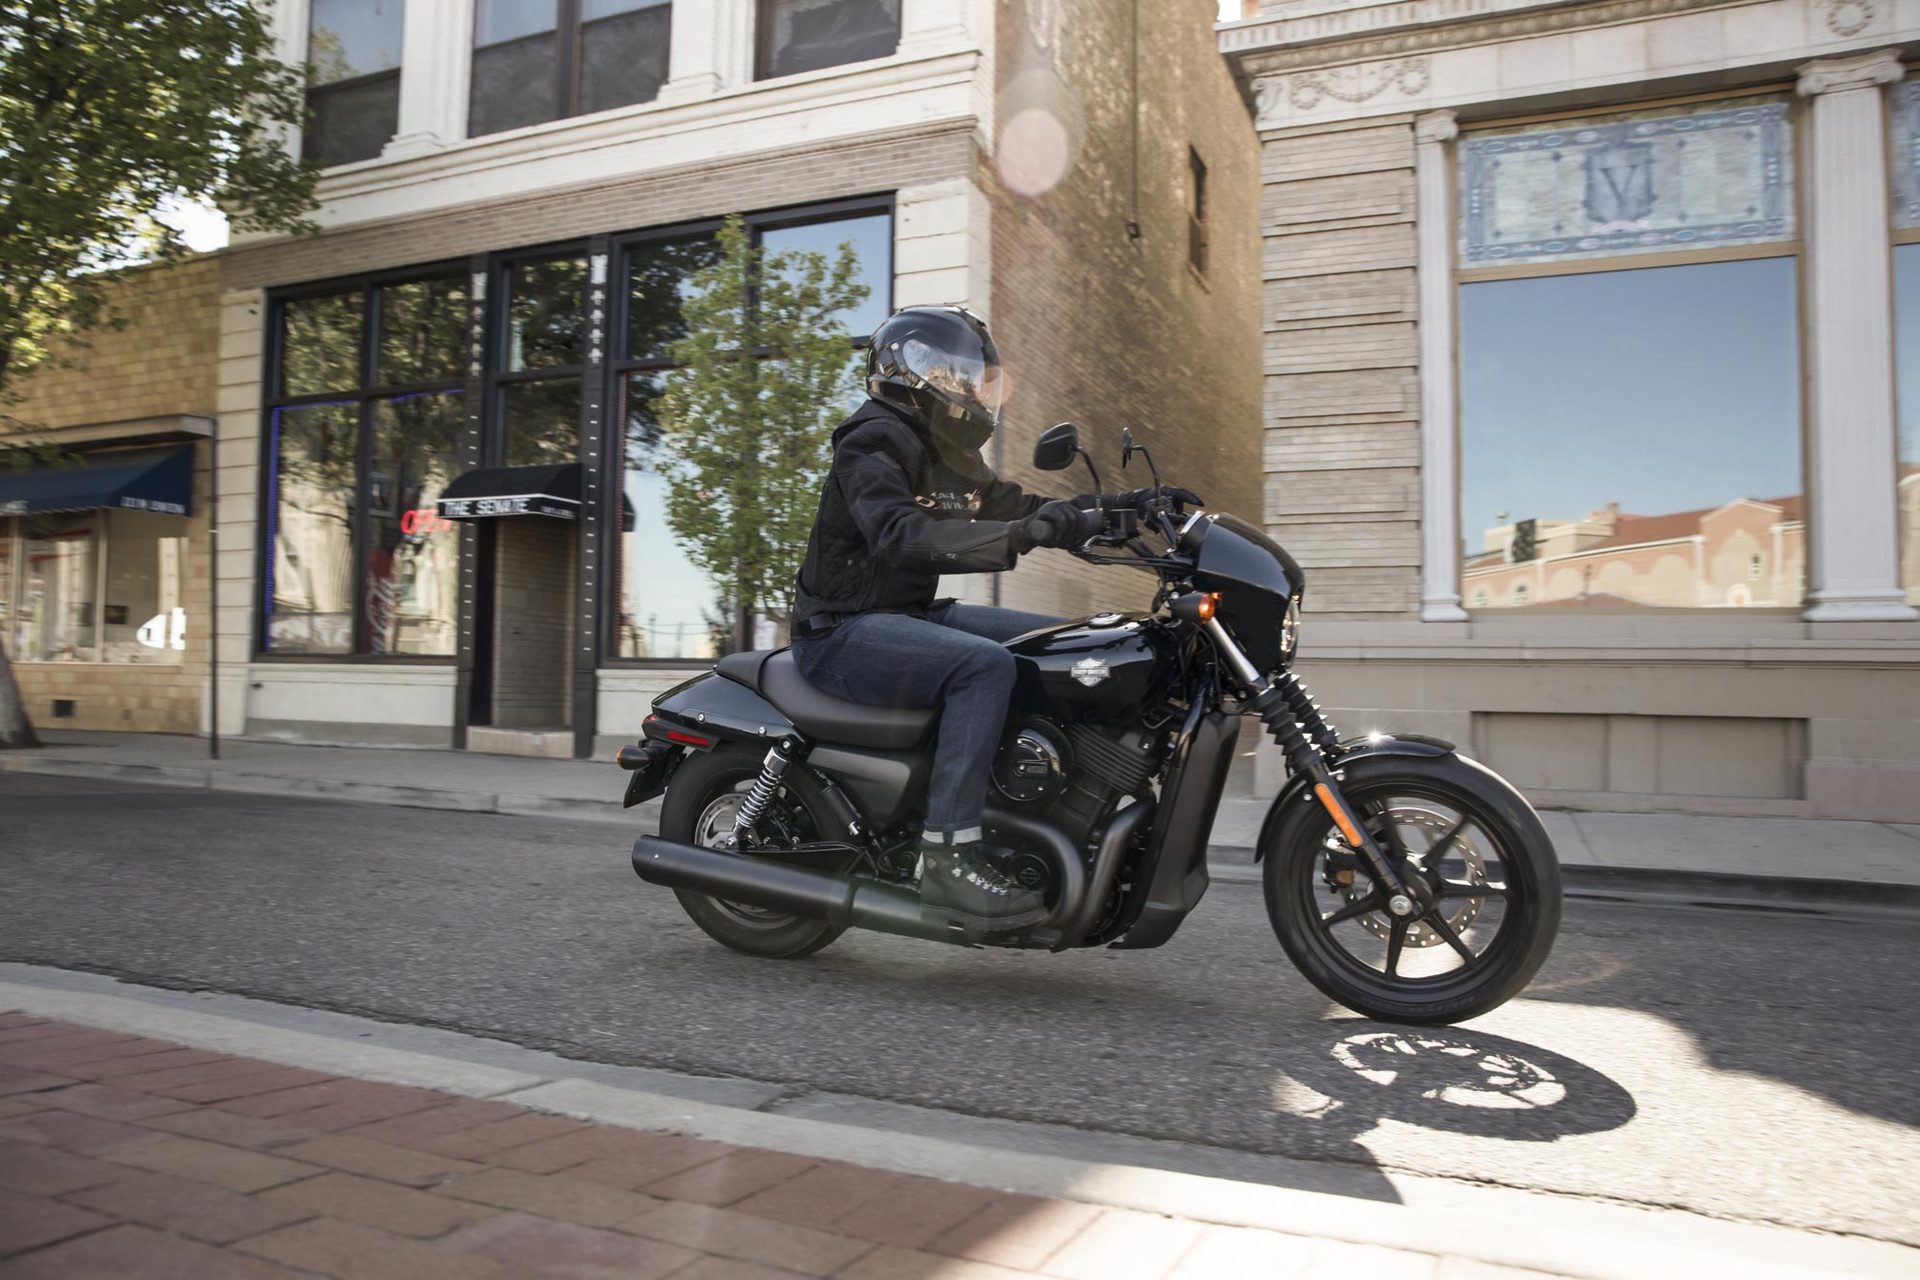 A Harley-Davidson Street 500 motorcycle rides downs a street during a launch event in America.